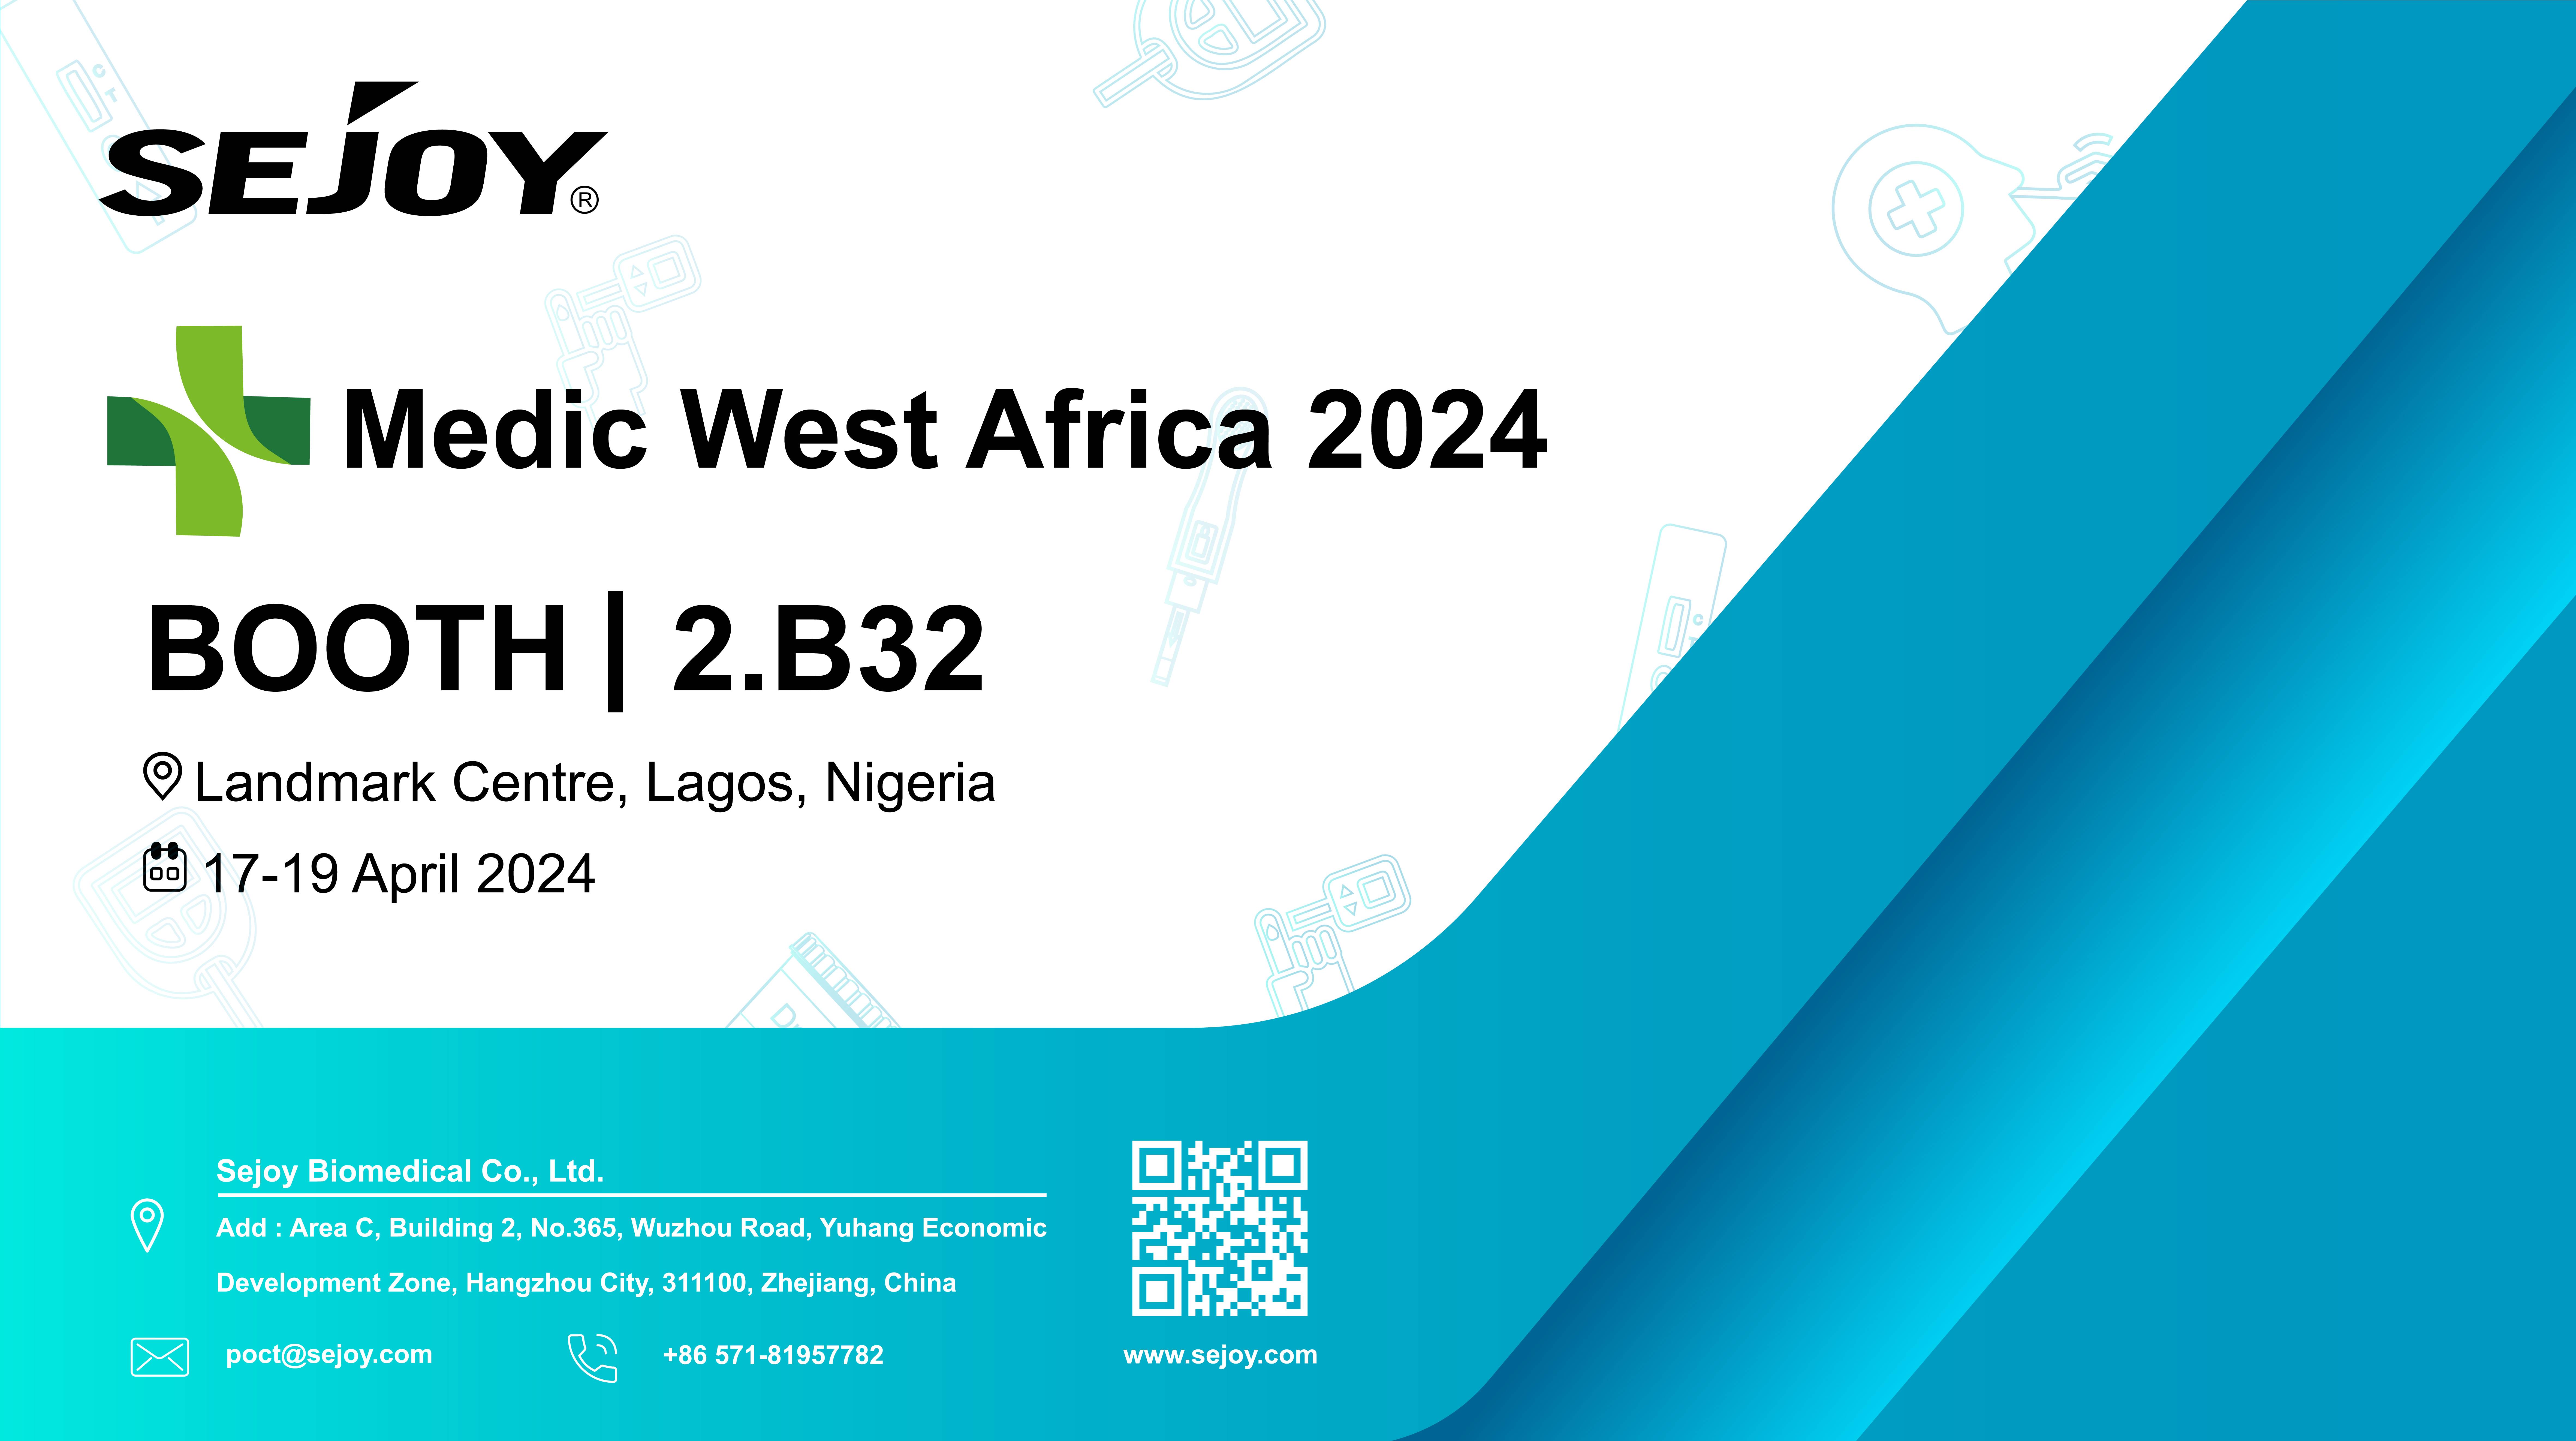 Get ready to participate in our Medic West Africa Exhibition in Nigeria!